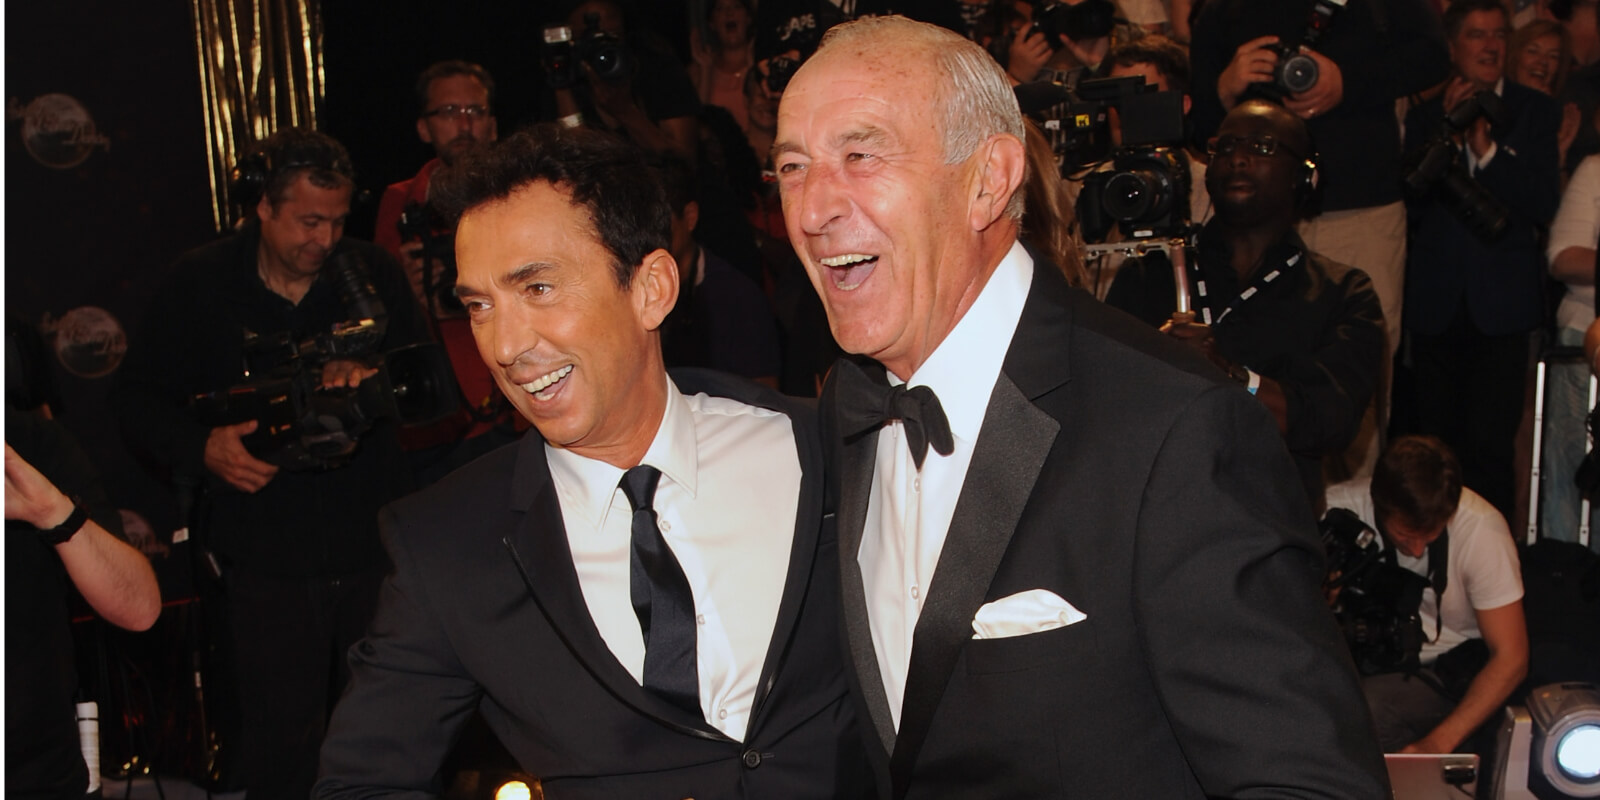 Bruno Tonioli and Len Goodman, in a 2013 photo, judged 'Strictly Come Dancing' for the BBC.